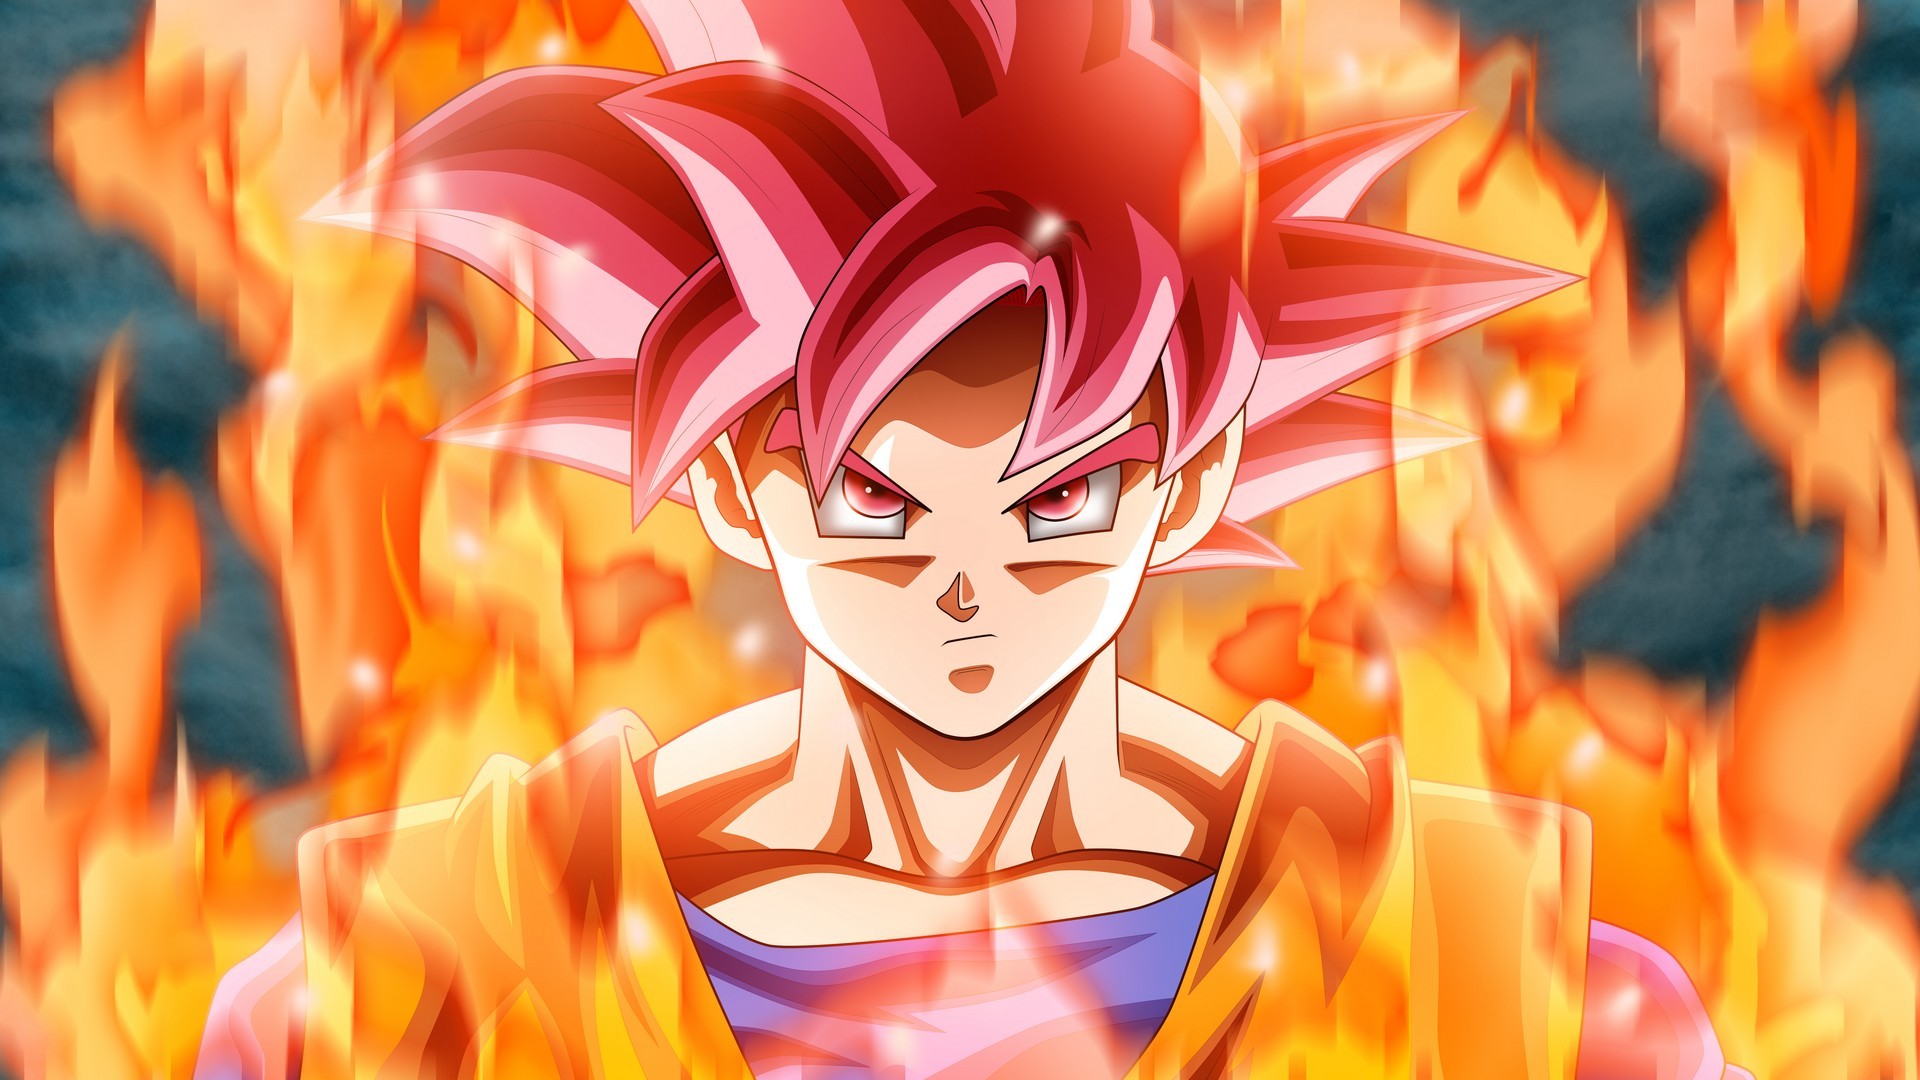 Best Goku Super Saiyan God Wallpaper HD with image resolution 1920x1080 pixel. You can make this wallpaper for your Desktop Computer Backgrounds, Mac Wallpapers, Android Lock screen or iPhone Screensavers